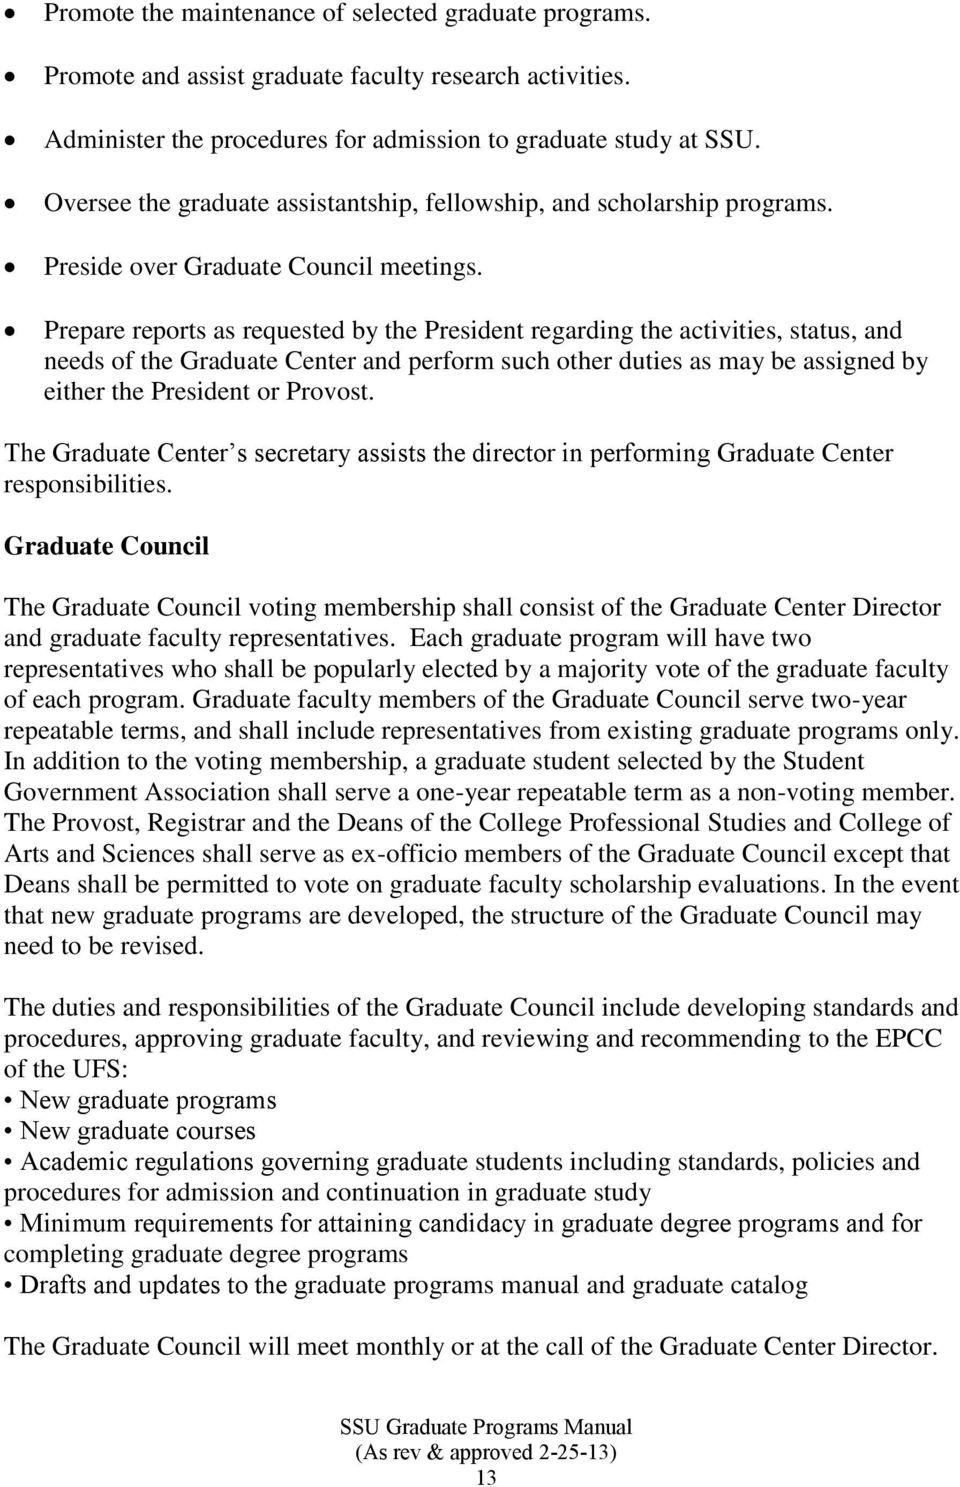 Prepare reports as requested by the President regarding the activities, status, and needs of the Graduate Center and perform such other duties as may be assigned by either the President or Provost.